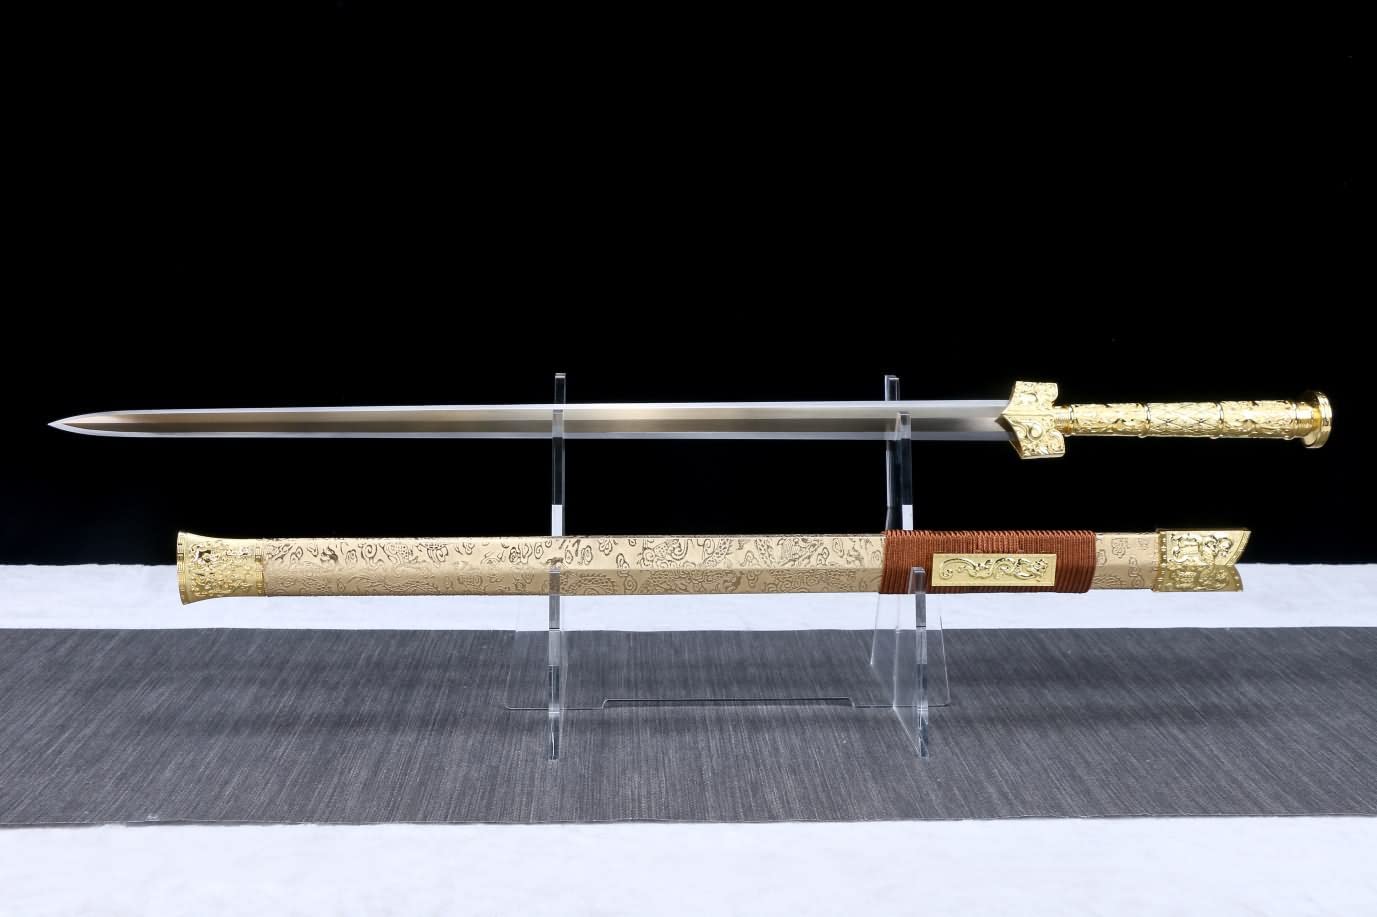 Golden Dragon Han jian,Chinese Swords Real,Forged Blade,Alloy Fittings,LOONGSWORD